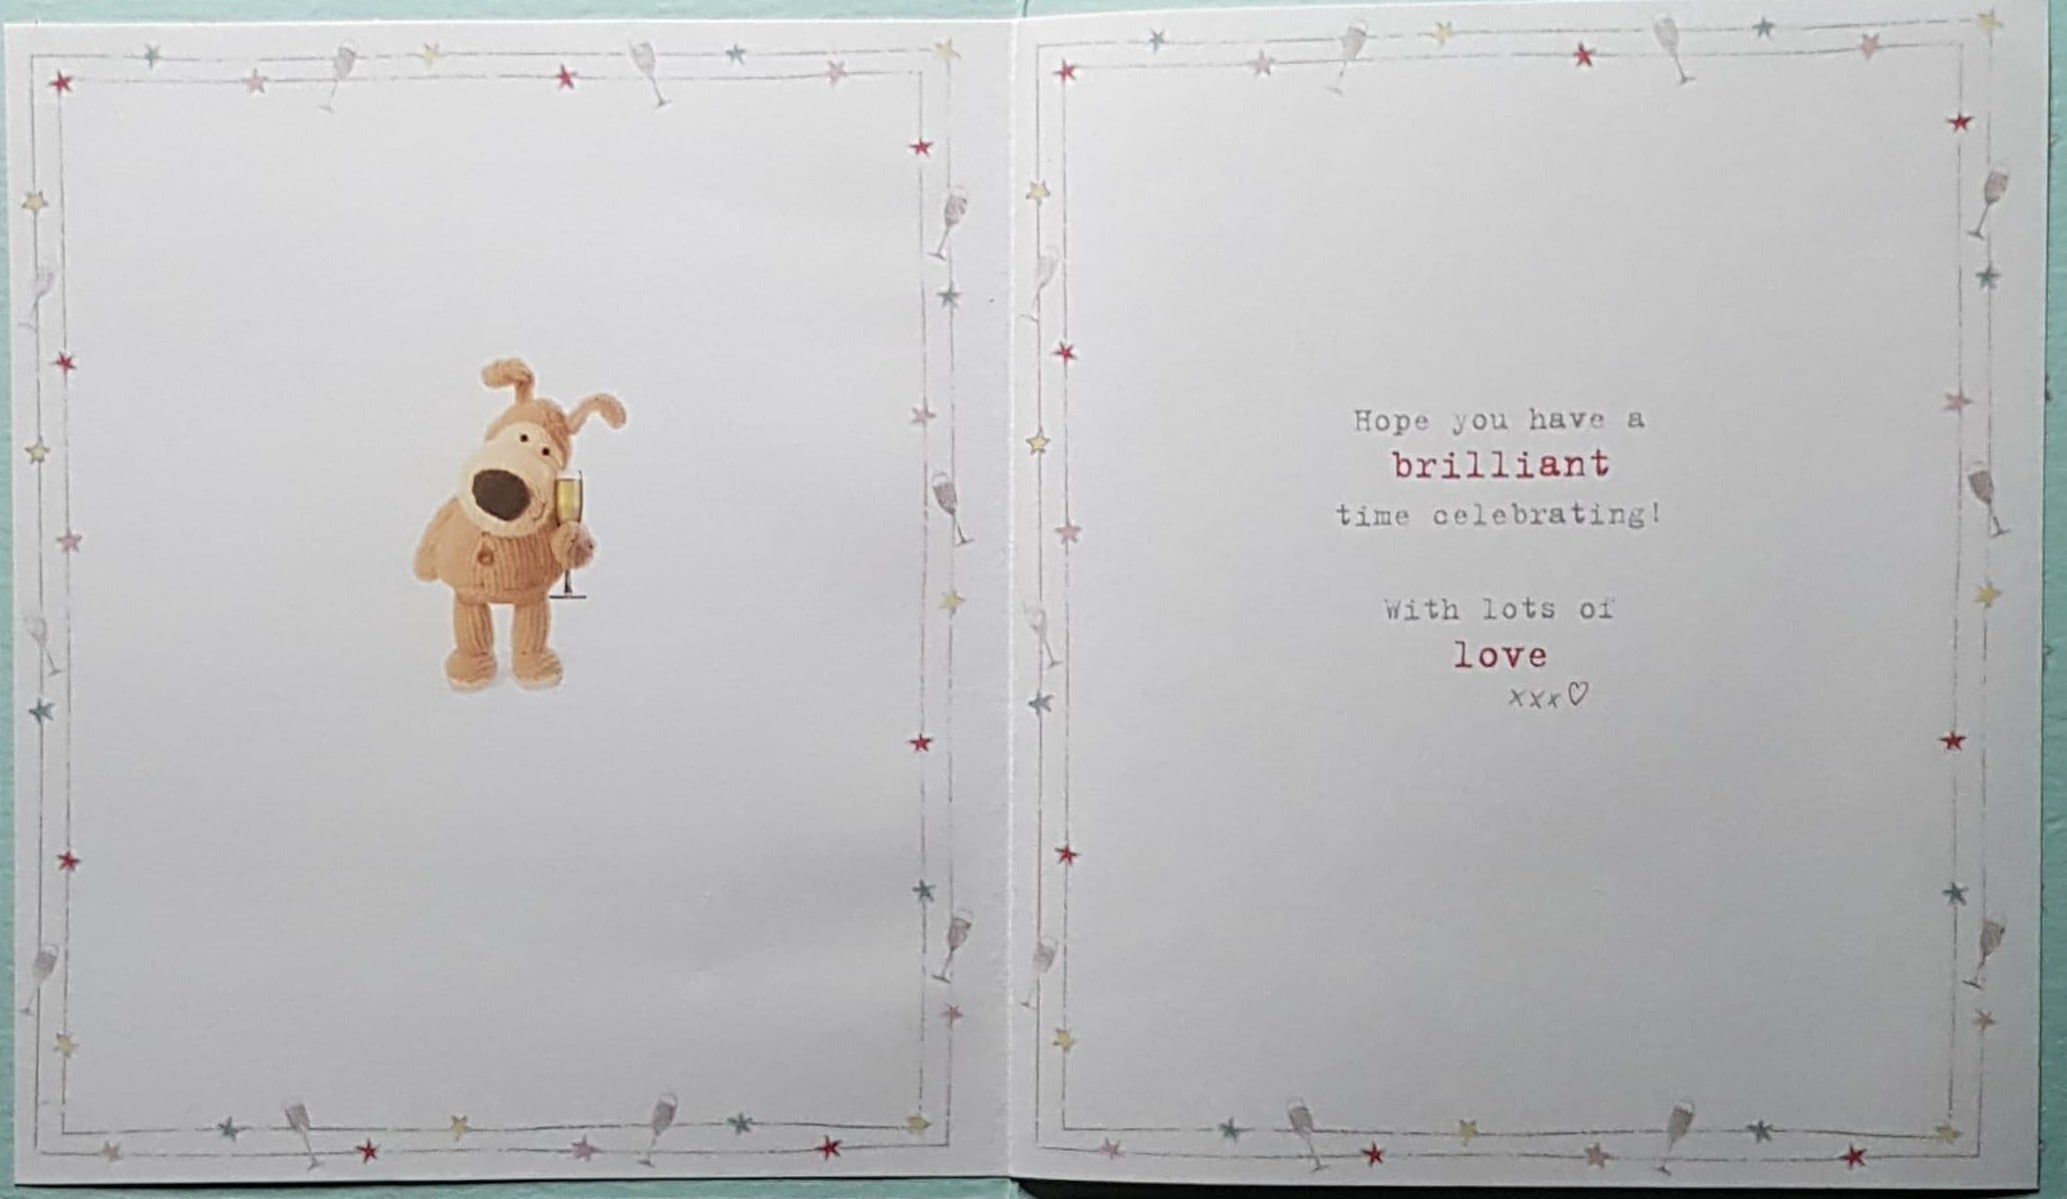 Age 40 Birthday Card - Cute Dog Teddy Holding A Glass Of Champagne